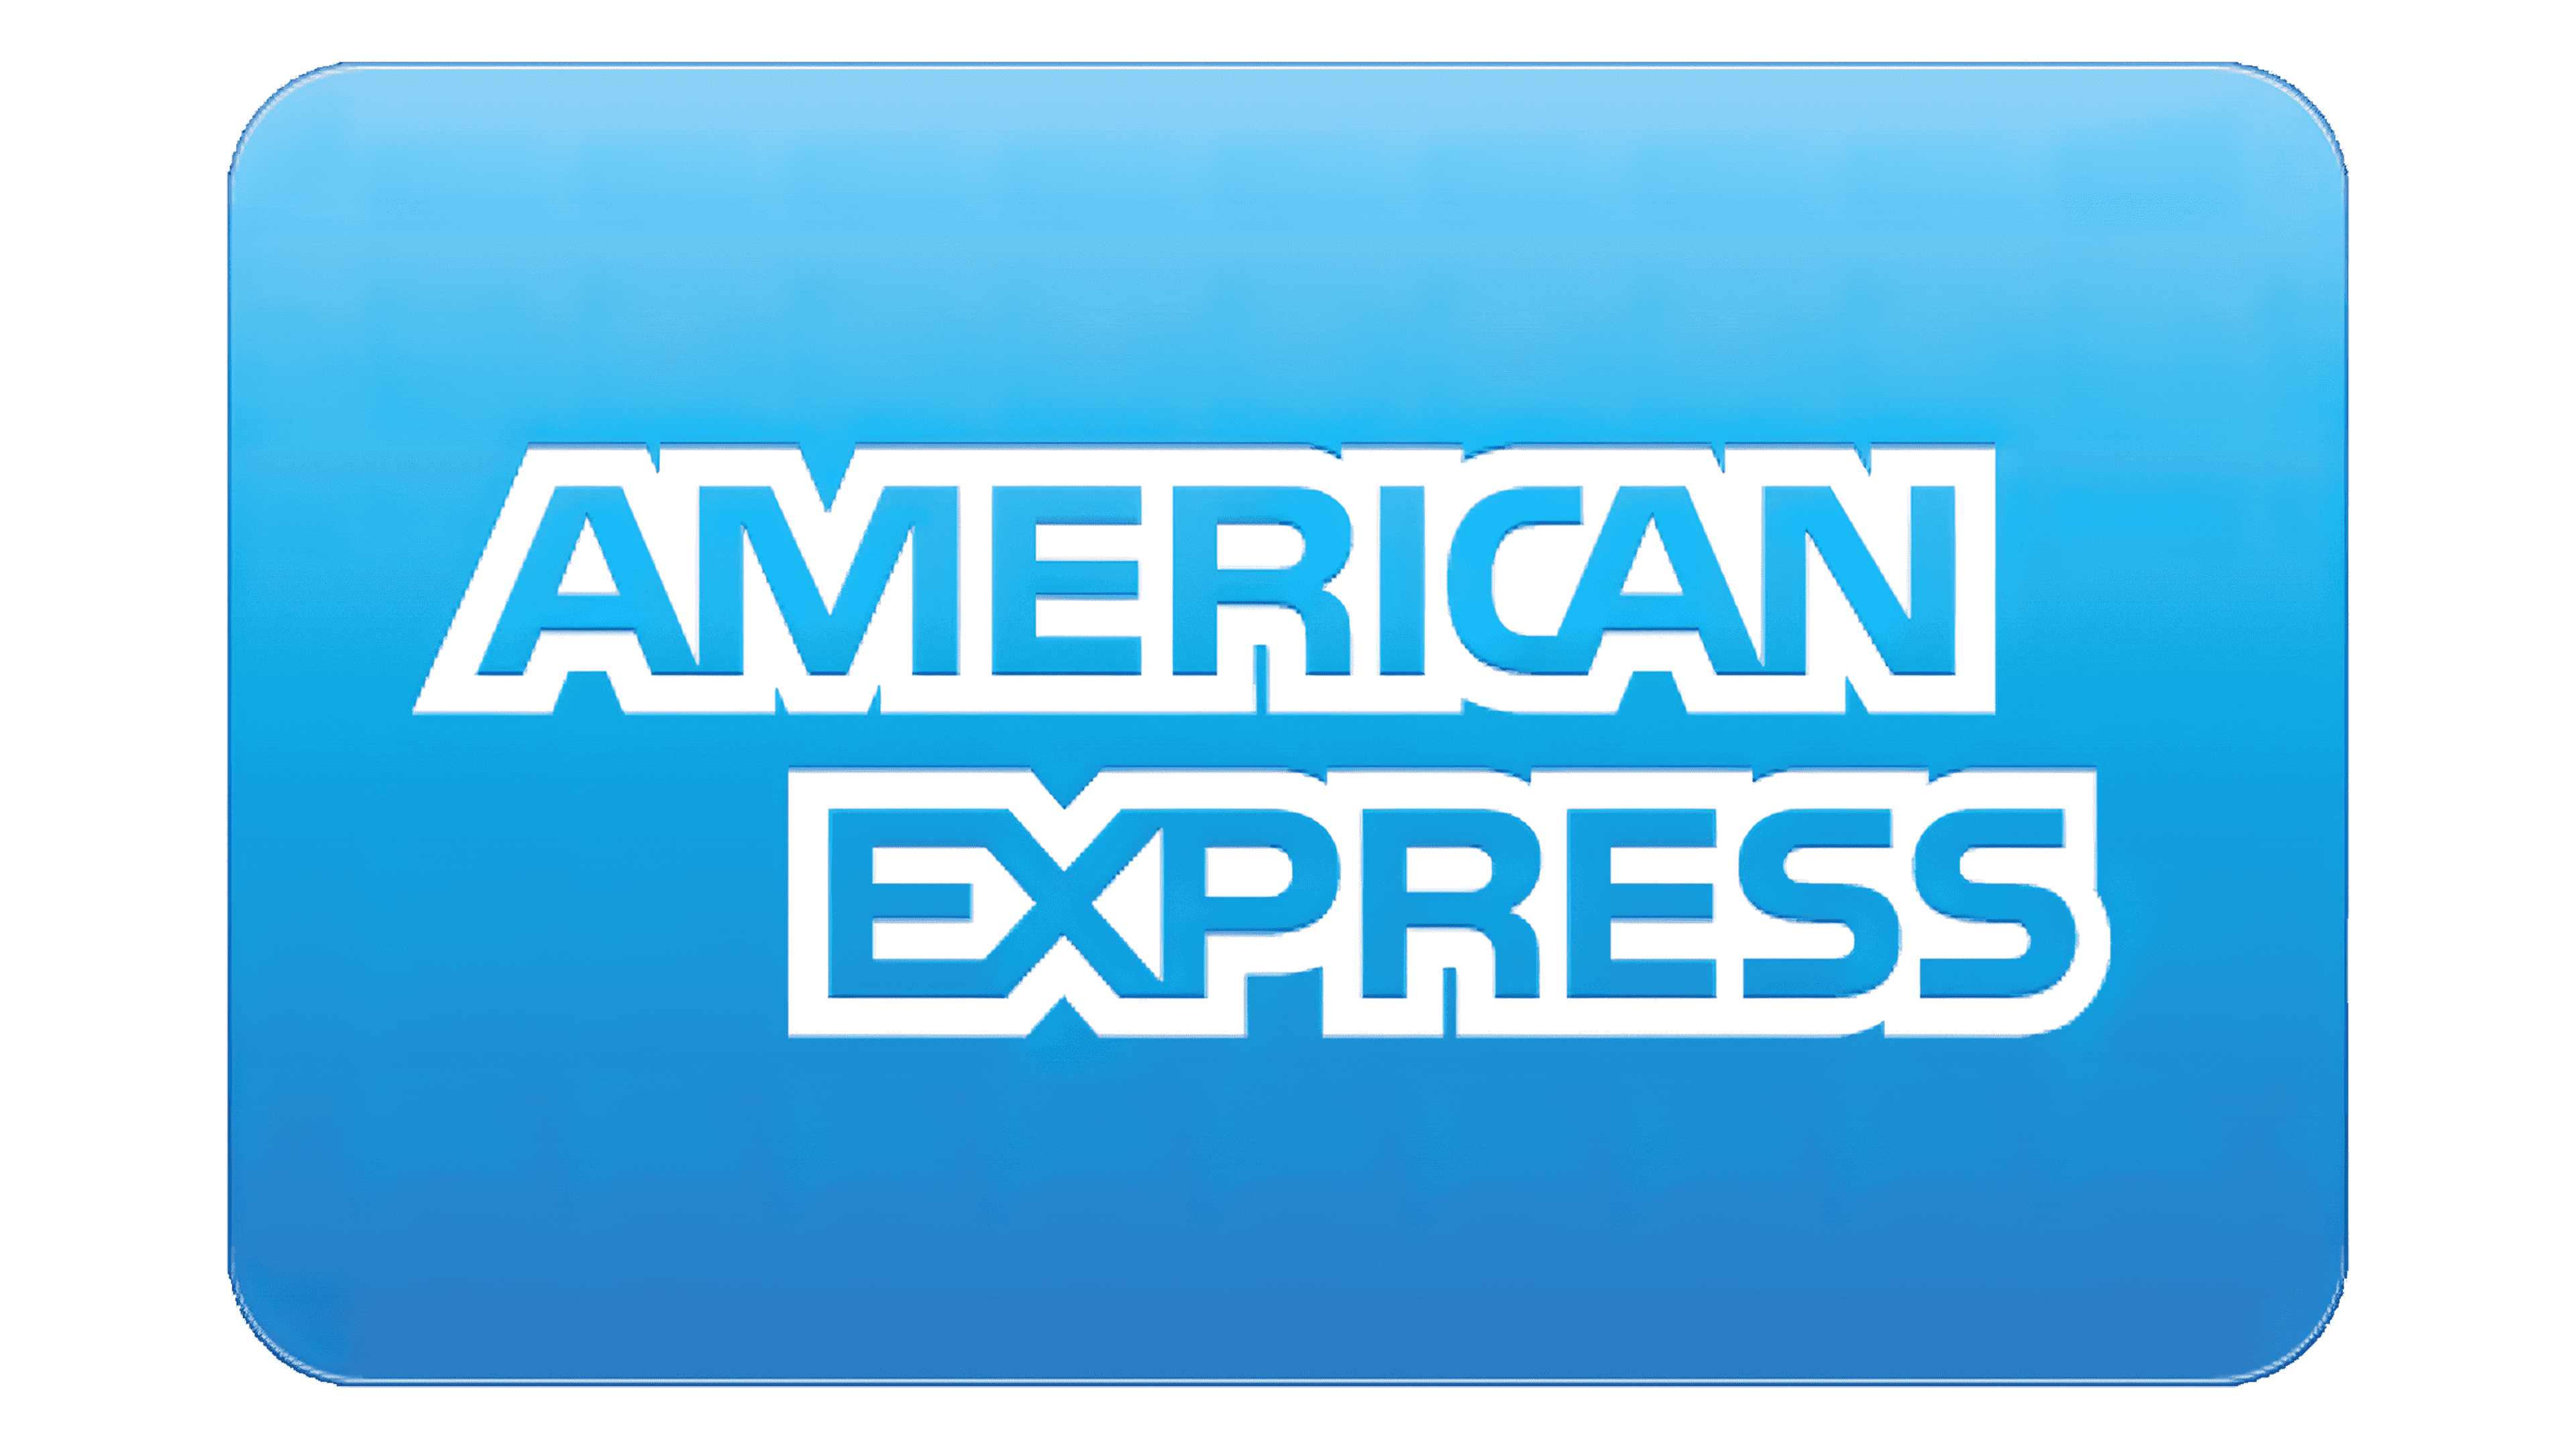 American express.png